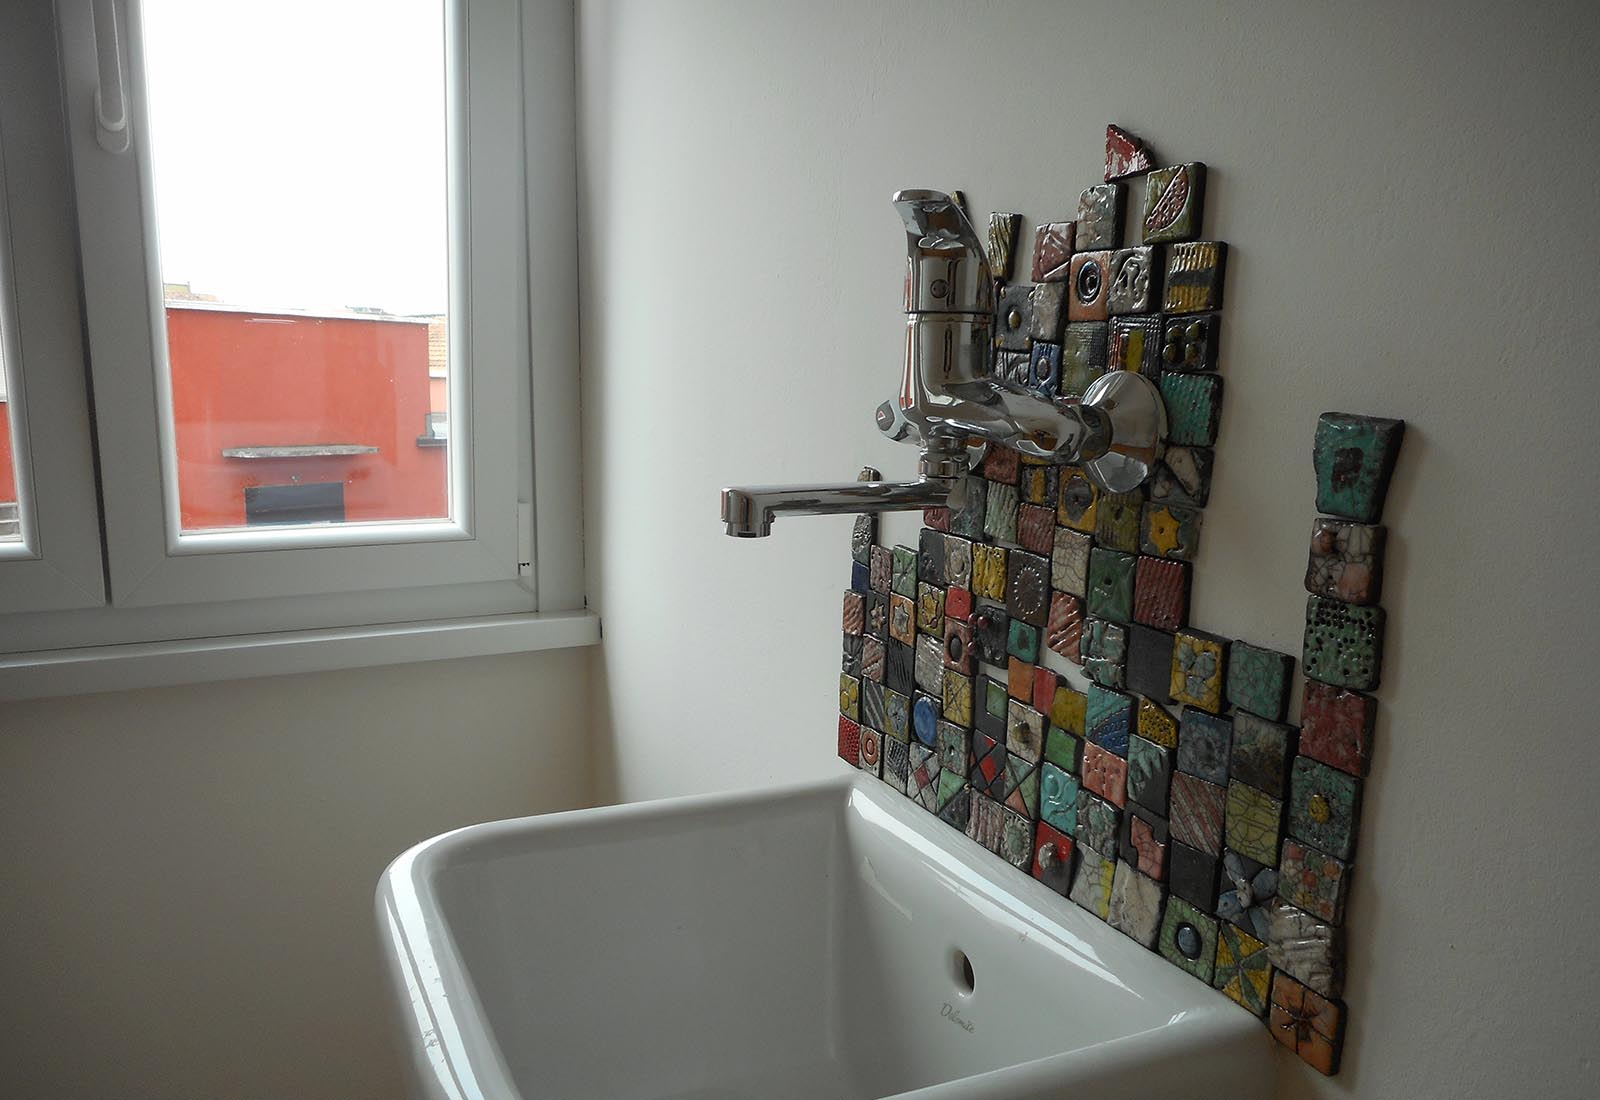 Apartment renovation in Rho - The sink of the ironing room